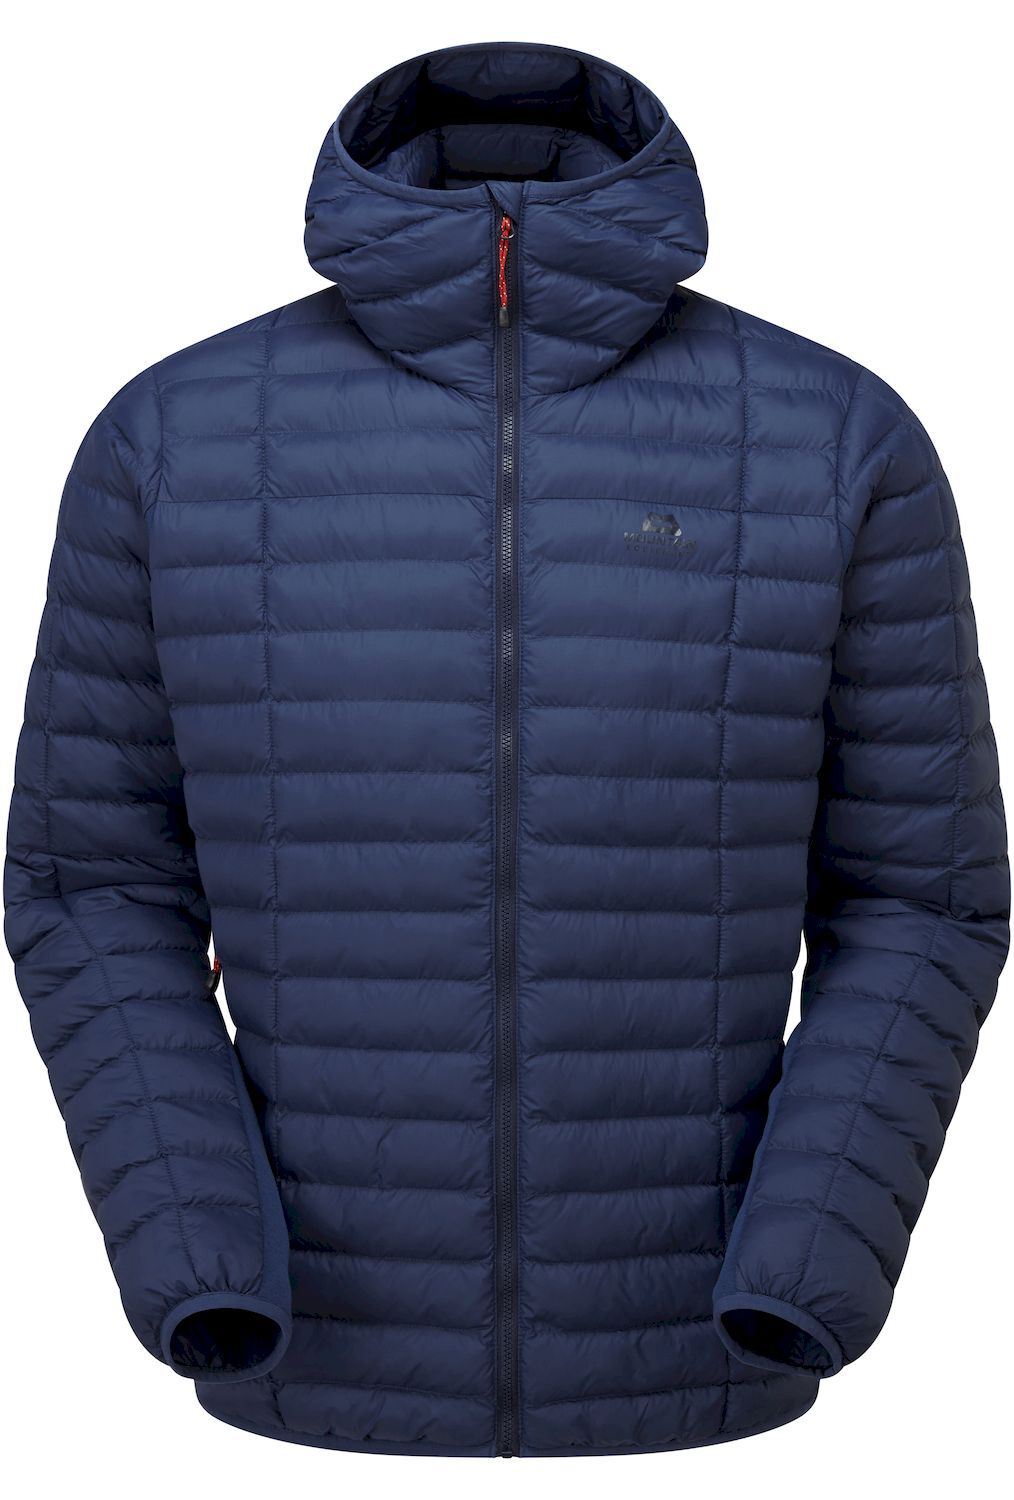 Mountain Equipment Particle Hooded Jacket - Giacca sintetica - Uomo